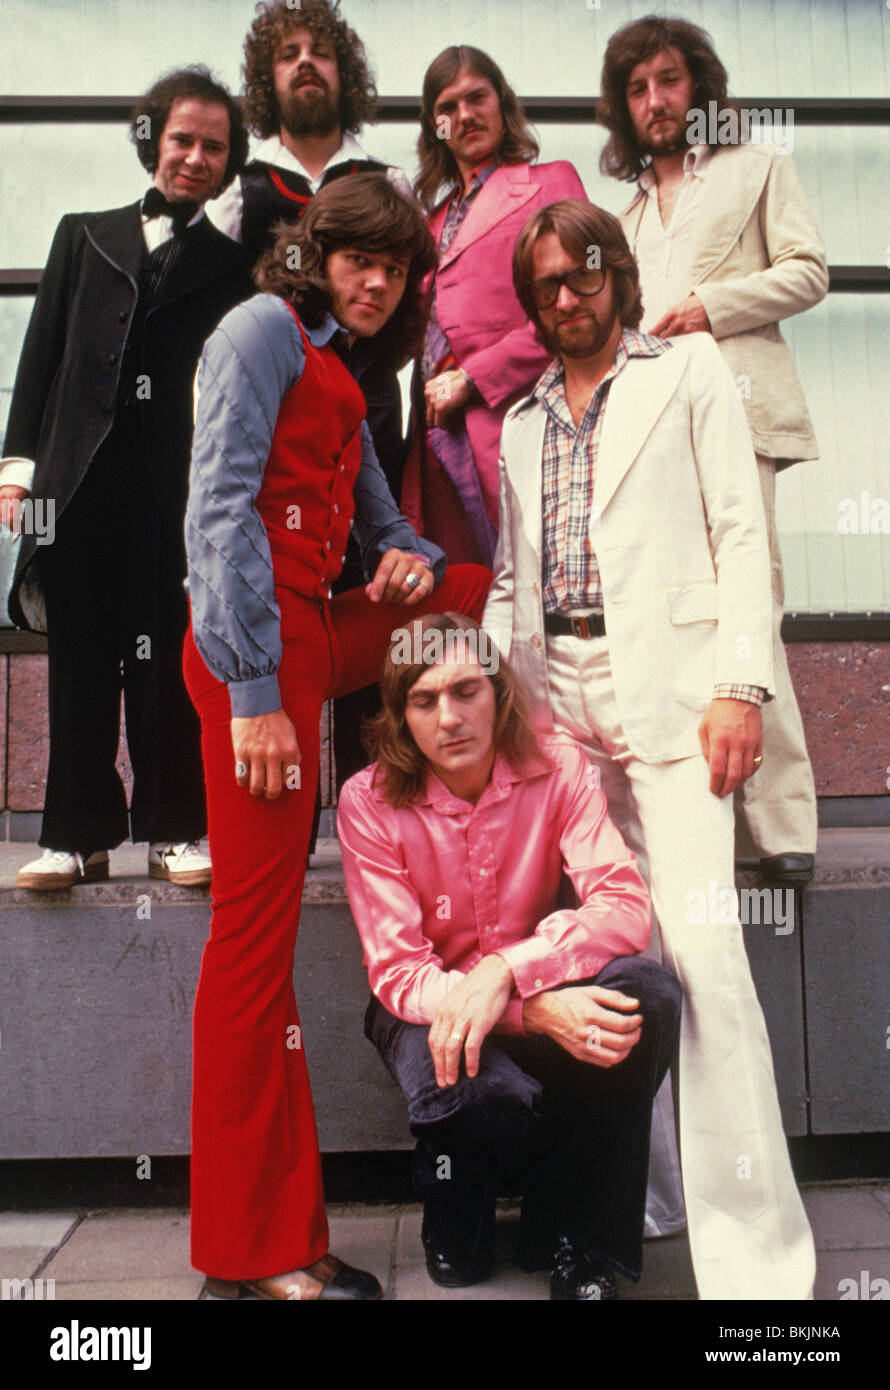 ELO - UK rock group about 1978 Stock Photo